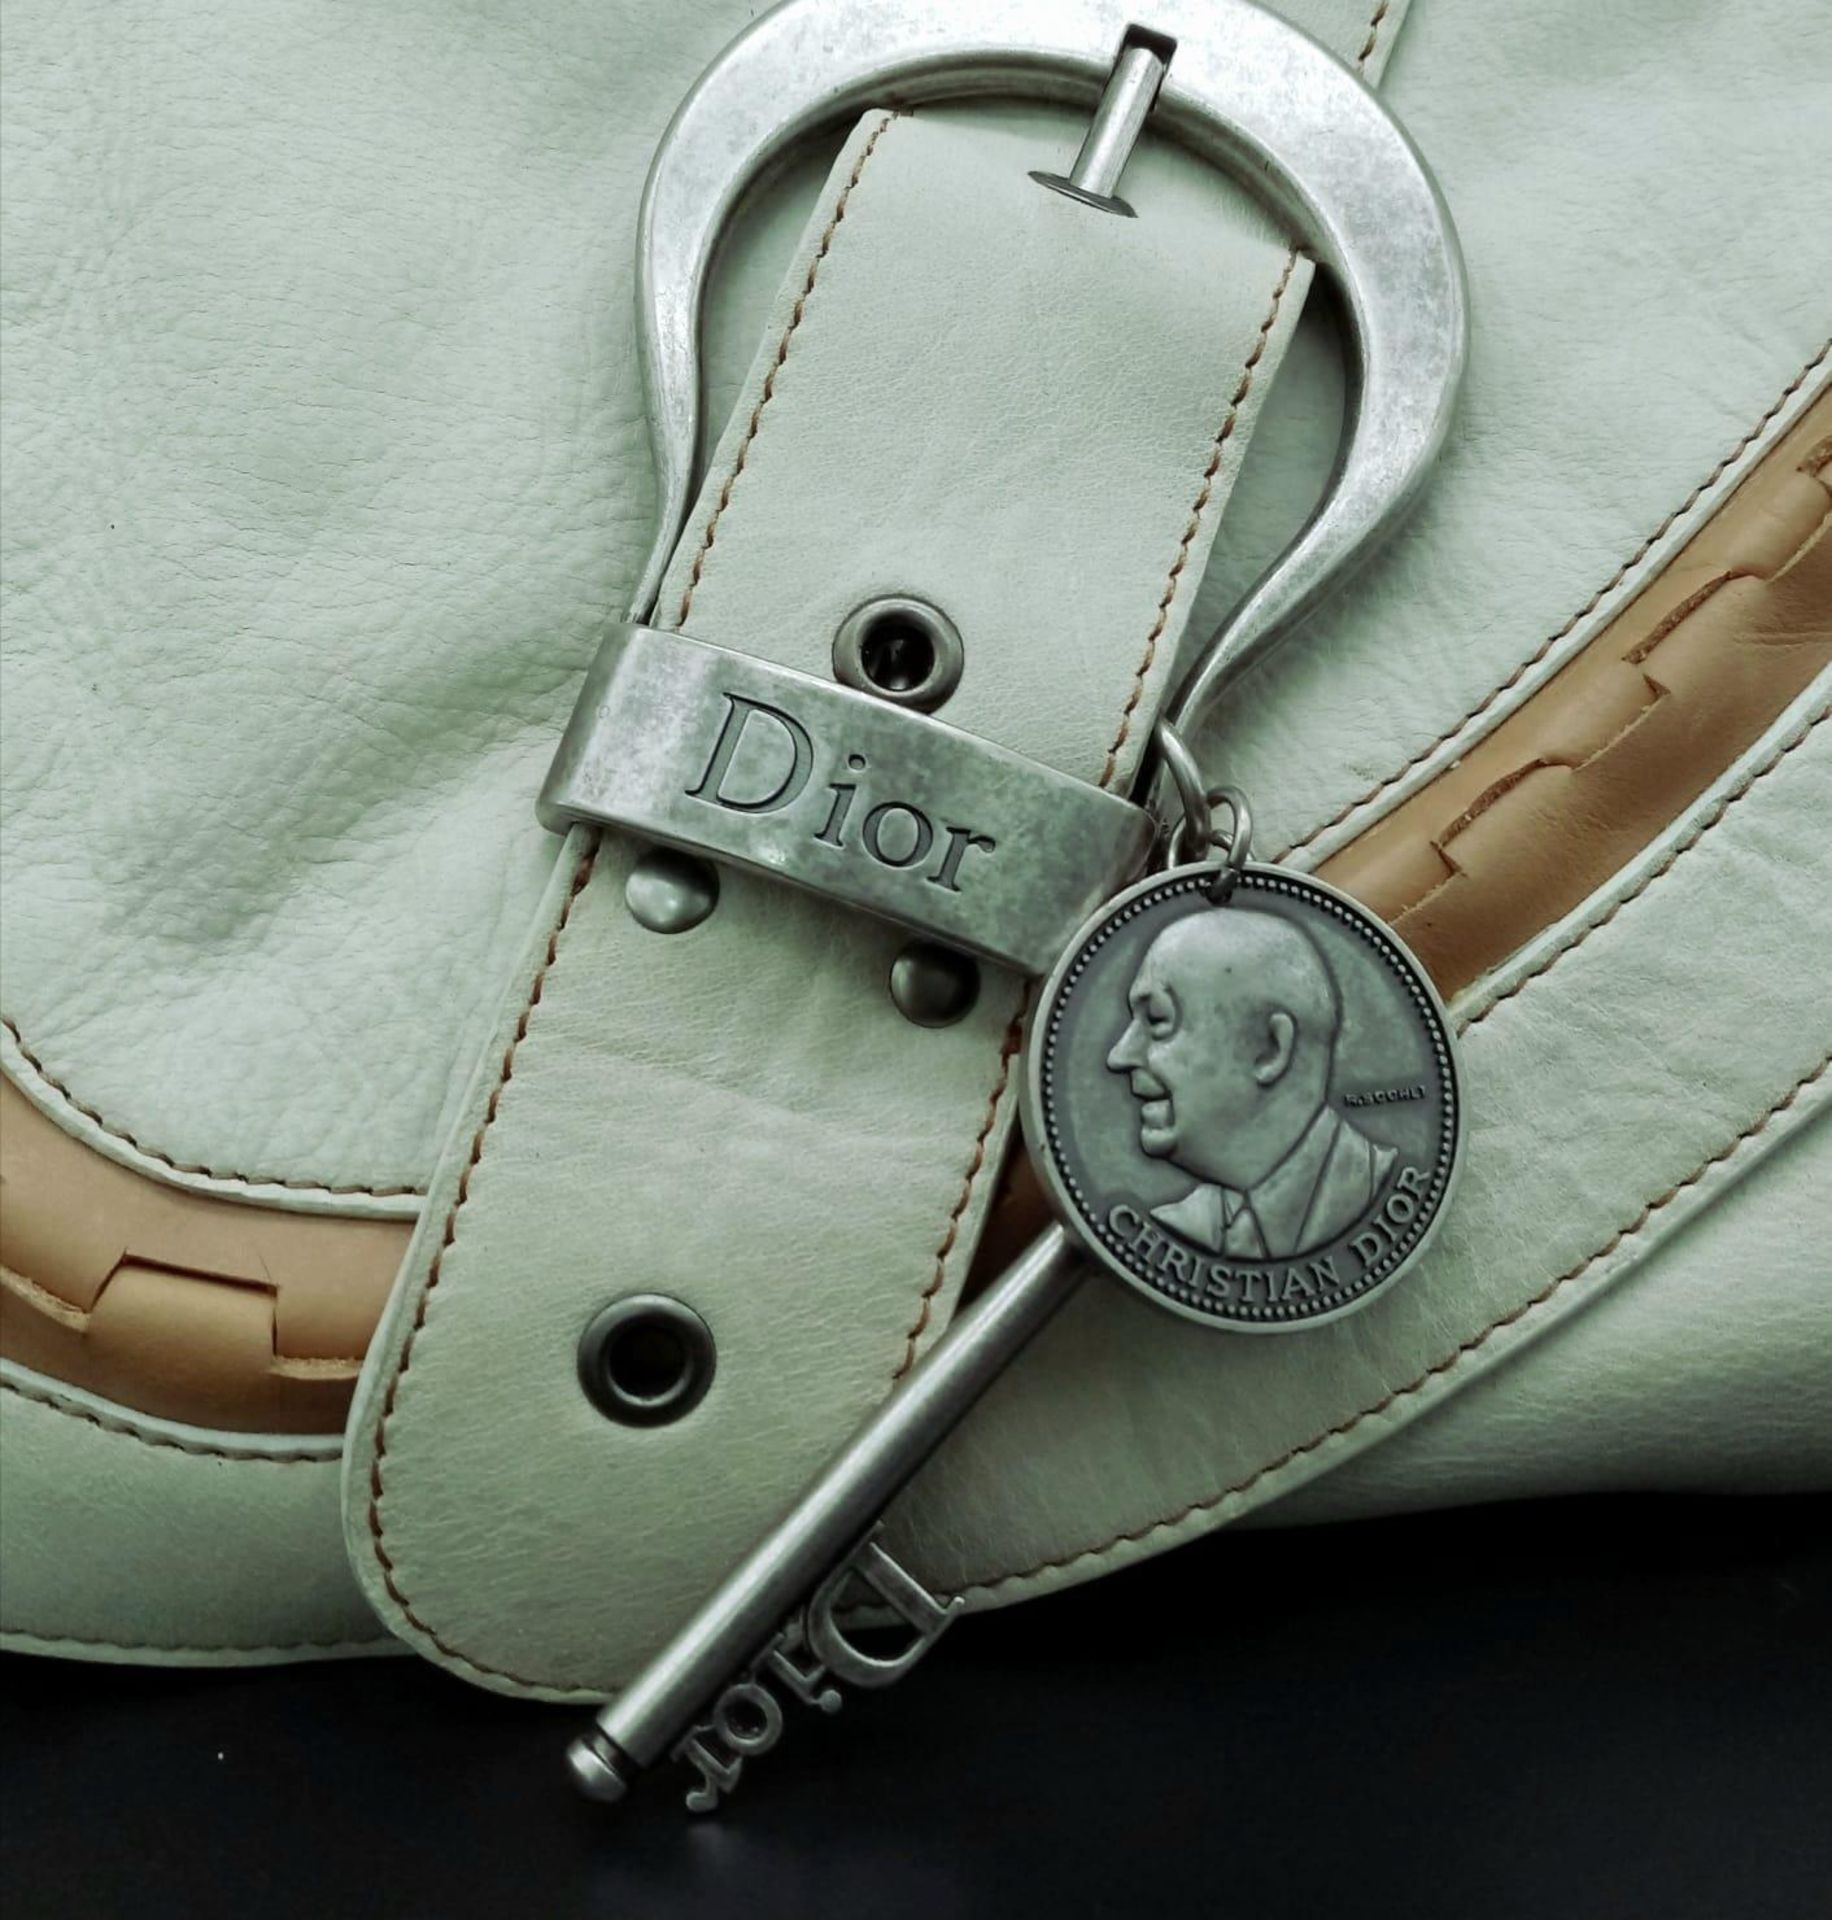 A Dior Gaucho Saddle Bag, Off-White Calf's Leather With Lamb Skin Boarders, Contrast Stitching - Image 4 of 7